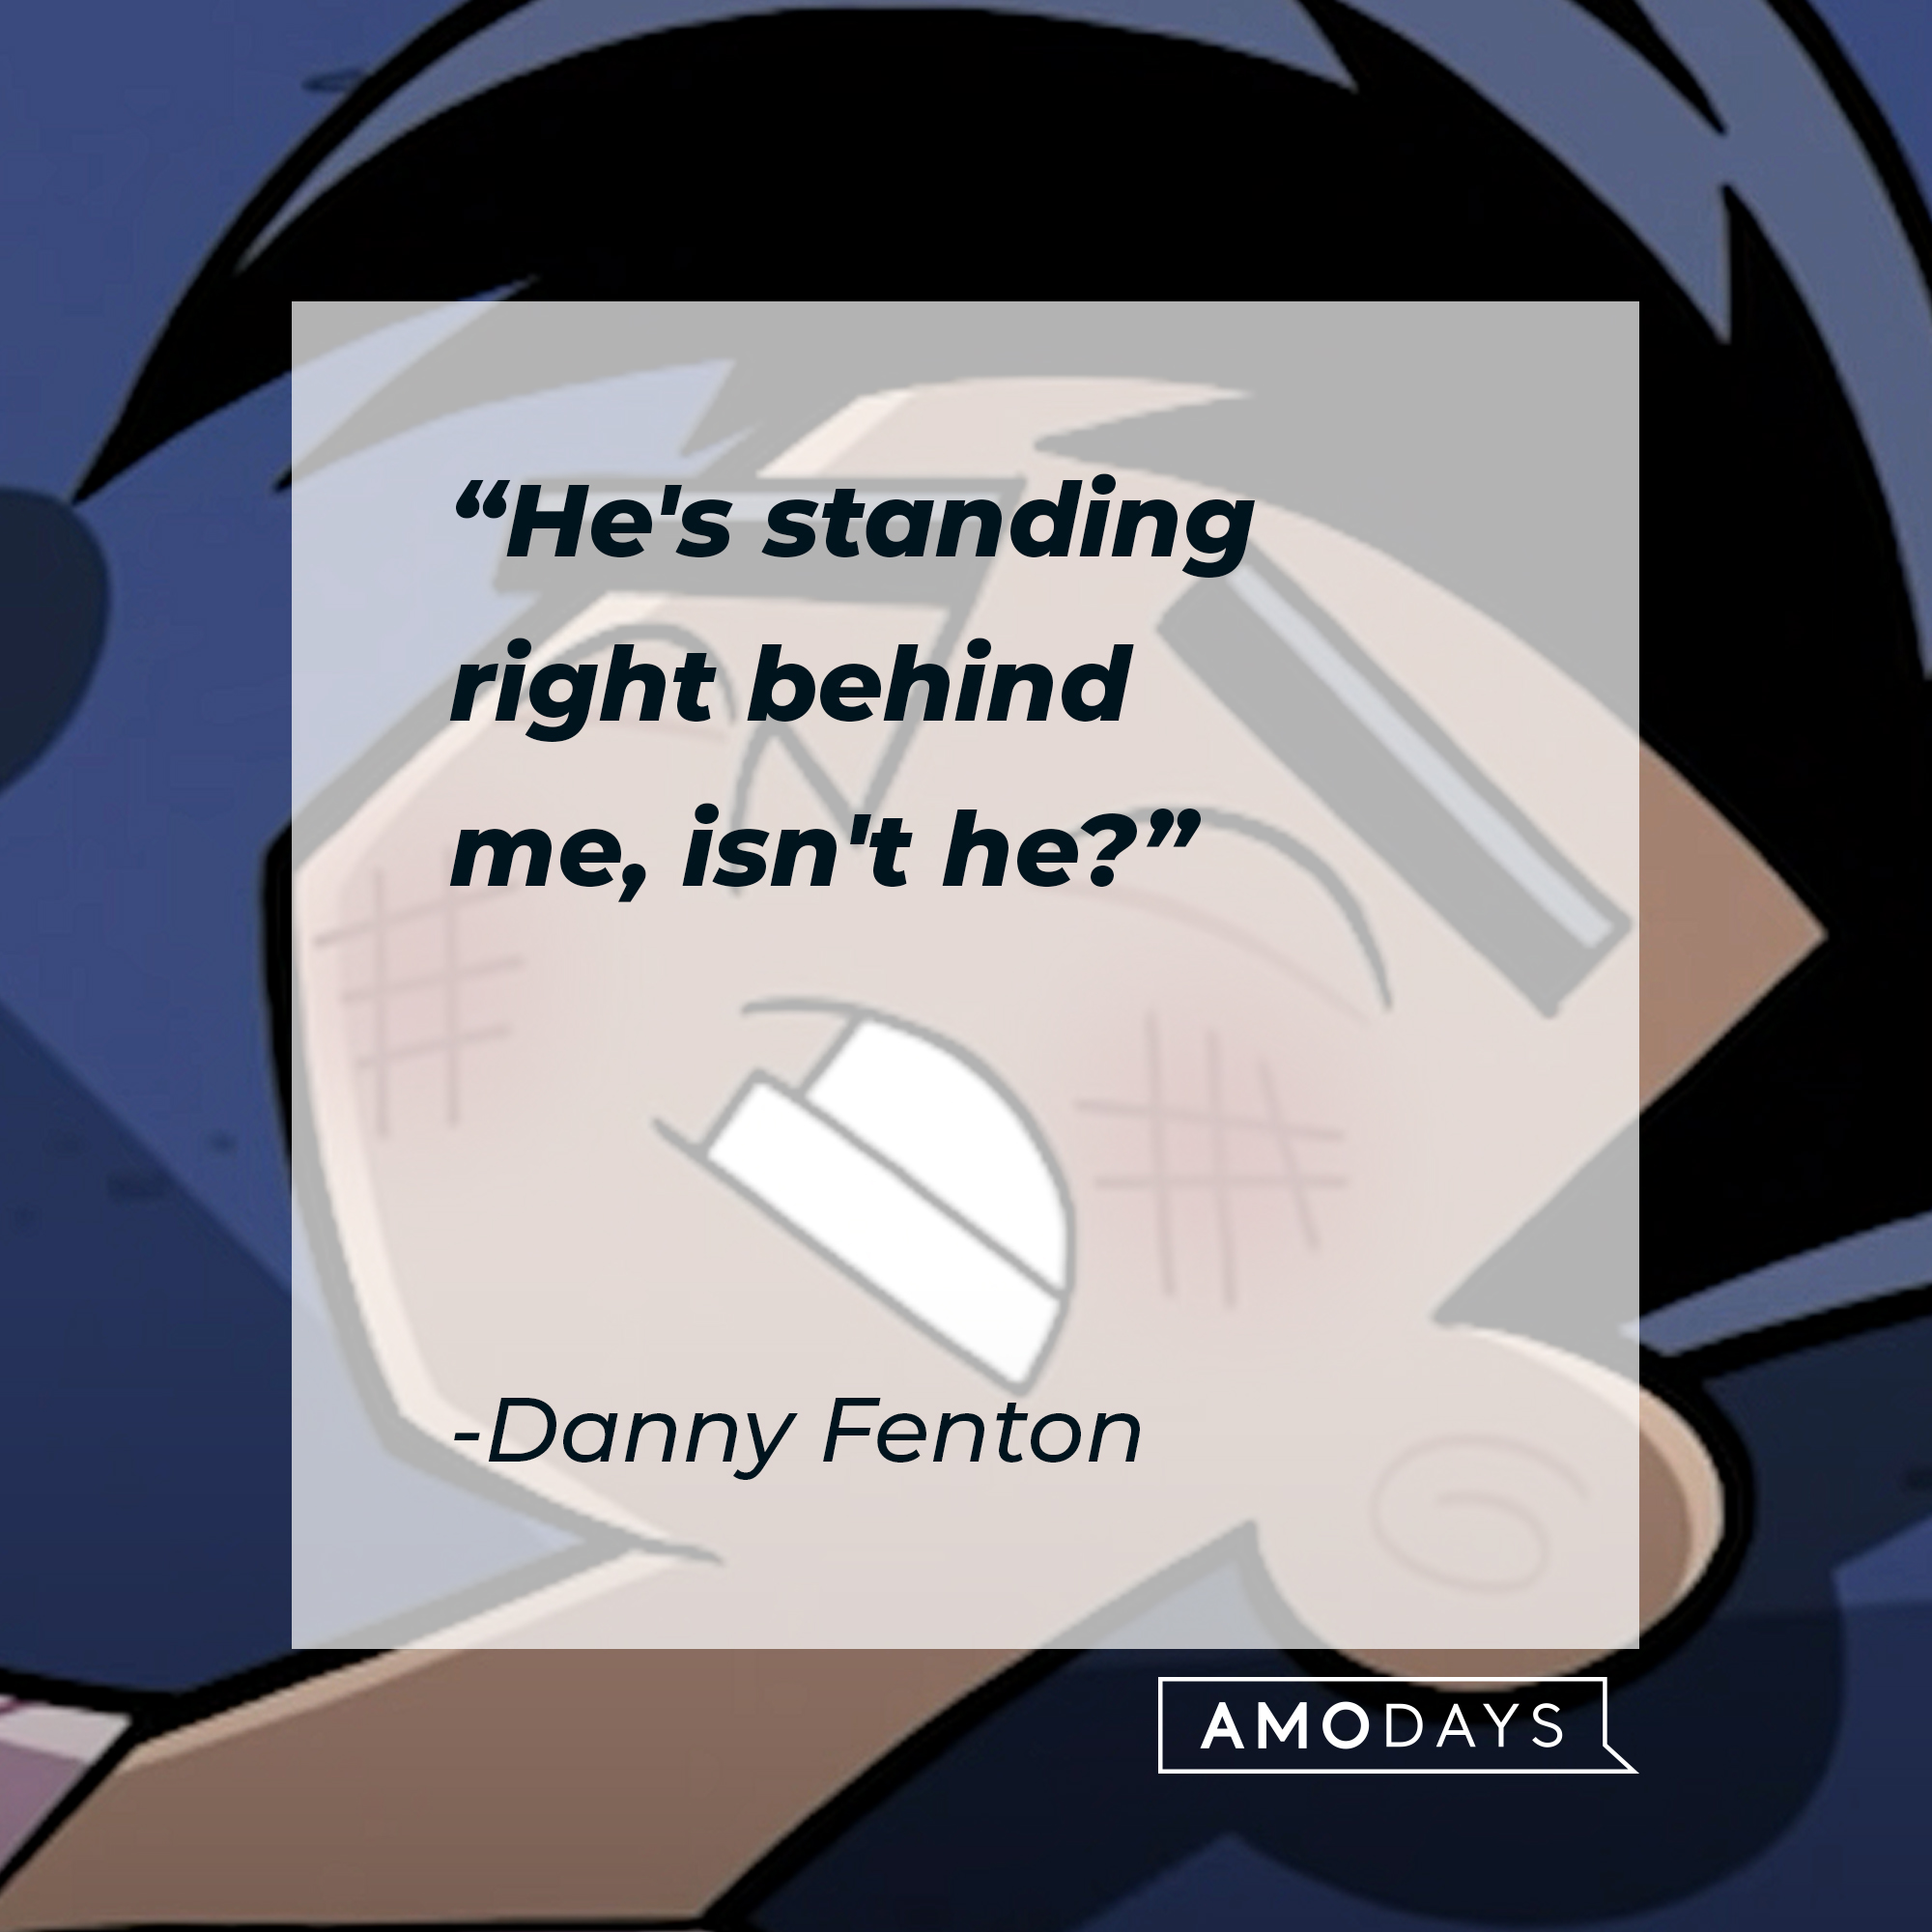 An image of Danny Fenton with Danny Fenton’s quote:“He's standing right behind me, isn't he?" | Source: youtube.com/nickrewind